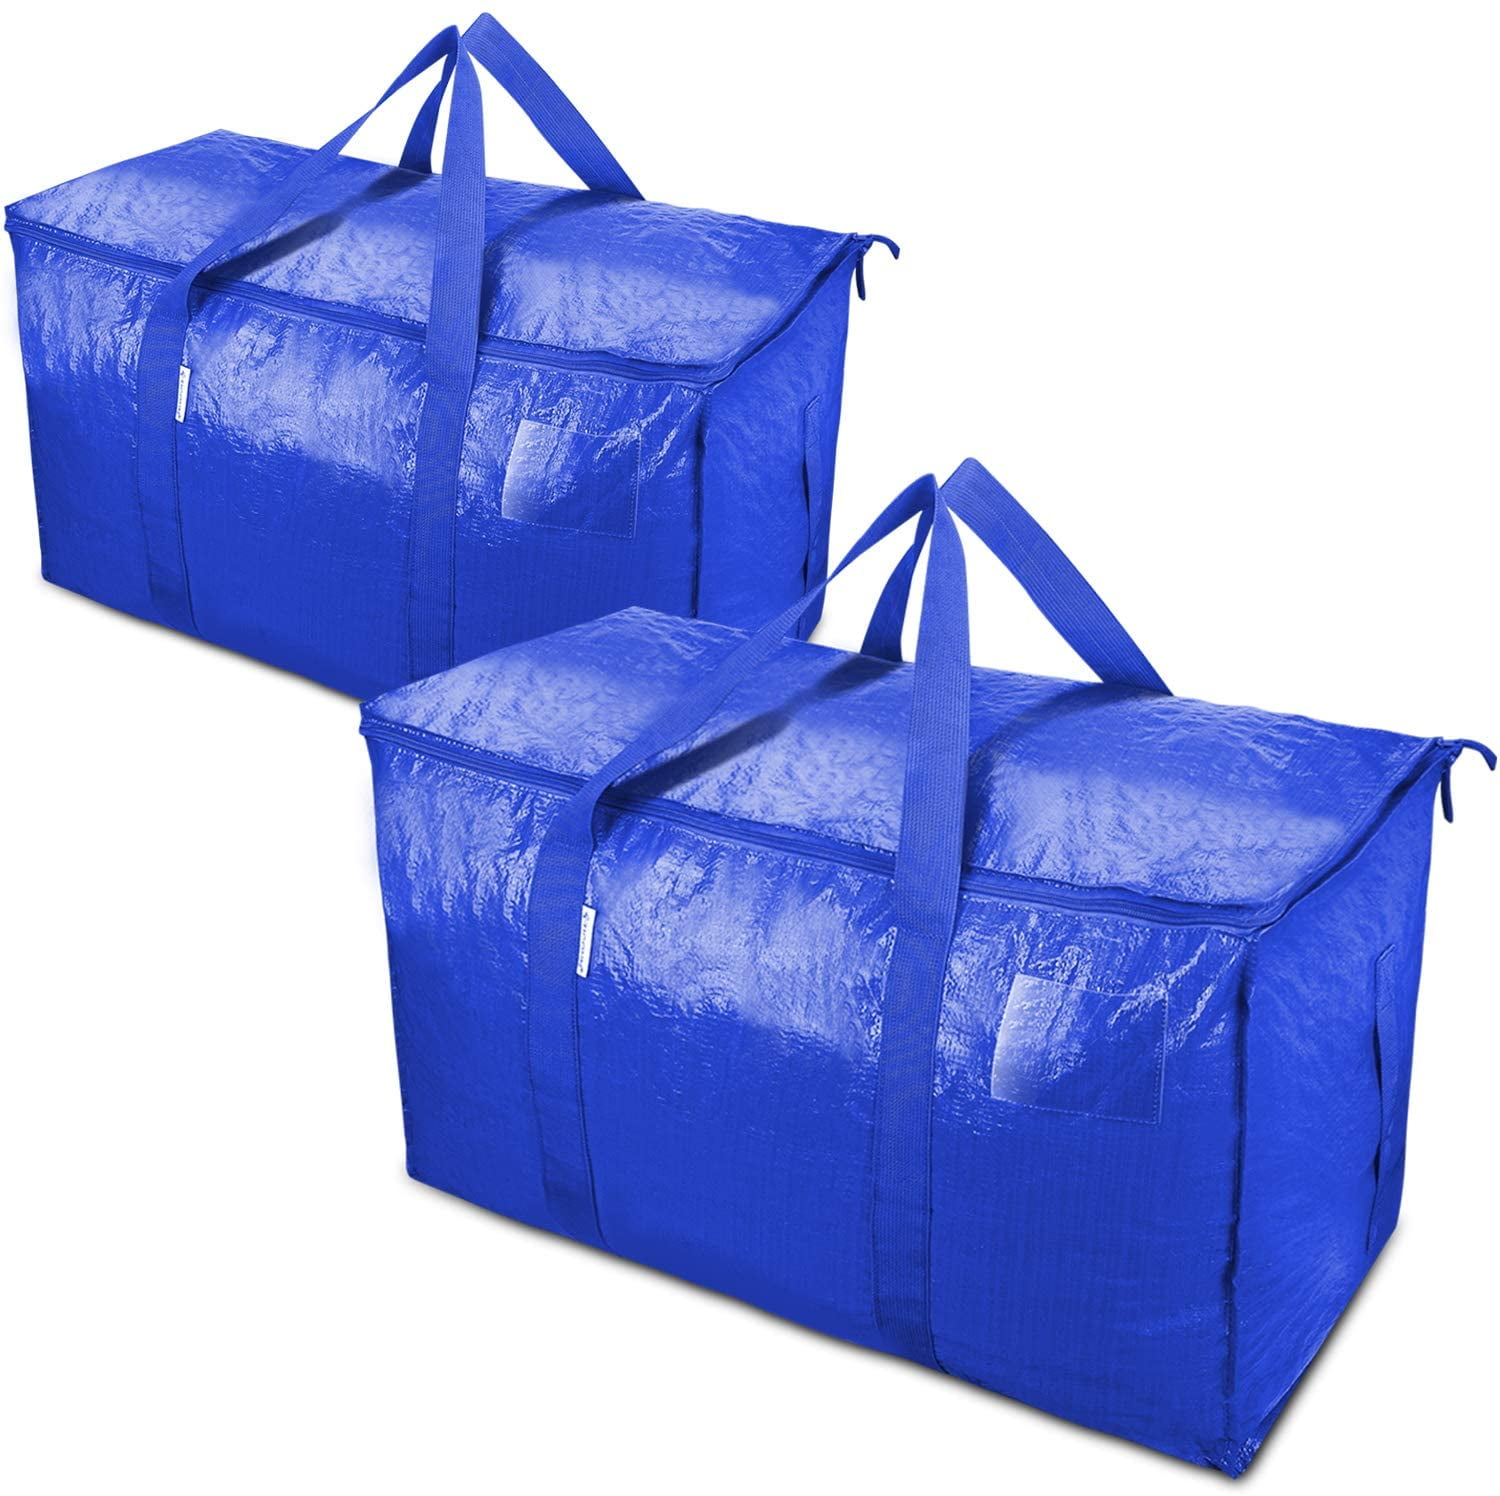  Extra Large Moving Bag Collapsible Storage Bins Tote Carrying  Water-Resistant Zipper Bags Organization Zipper Alternative to Moving Boxes  (LN 4pack blue) : Home & Kitchen